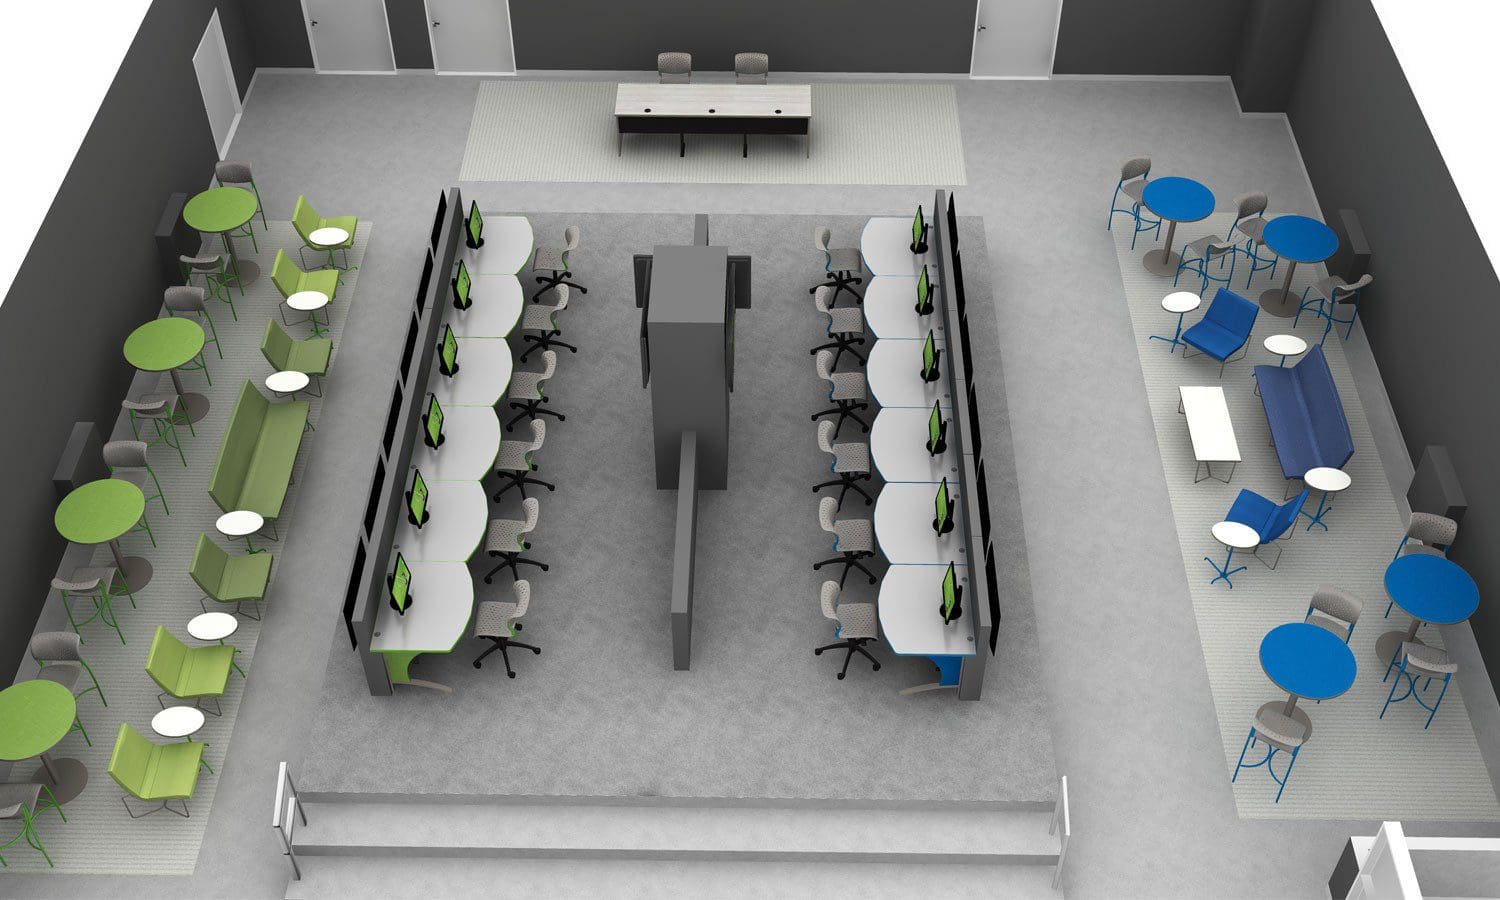 An overhead view of a classroom with desks and chairs.